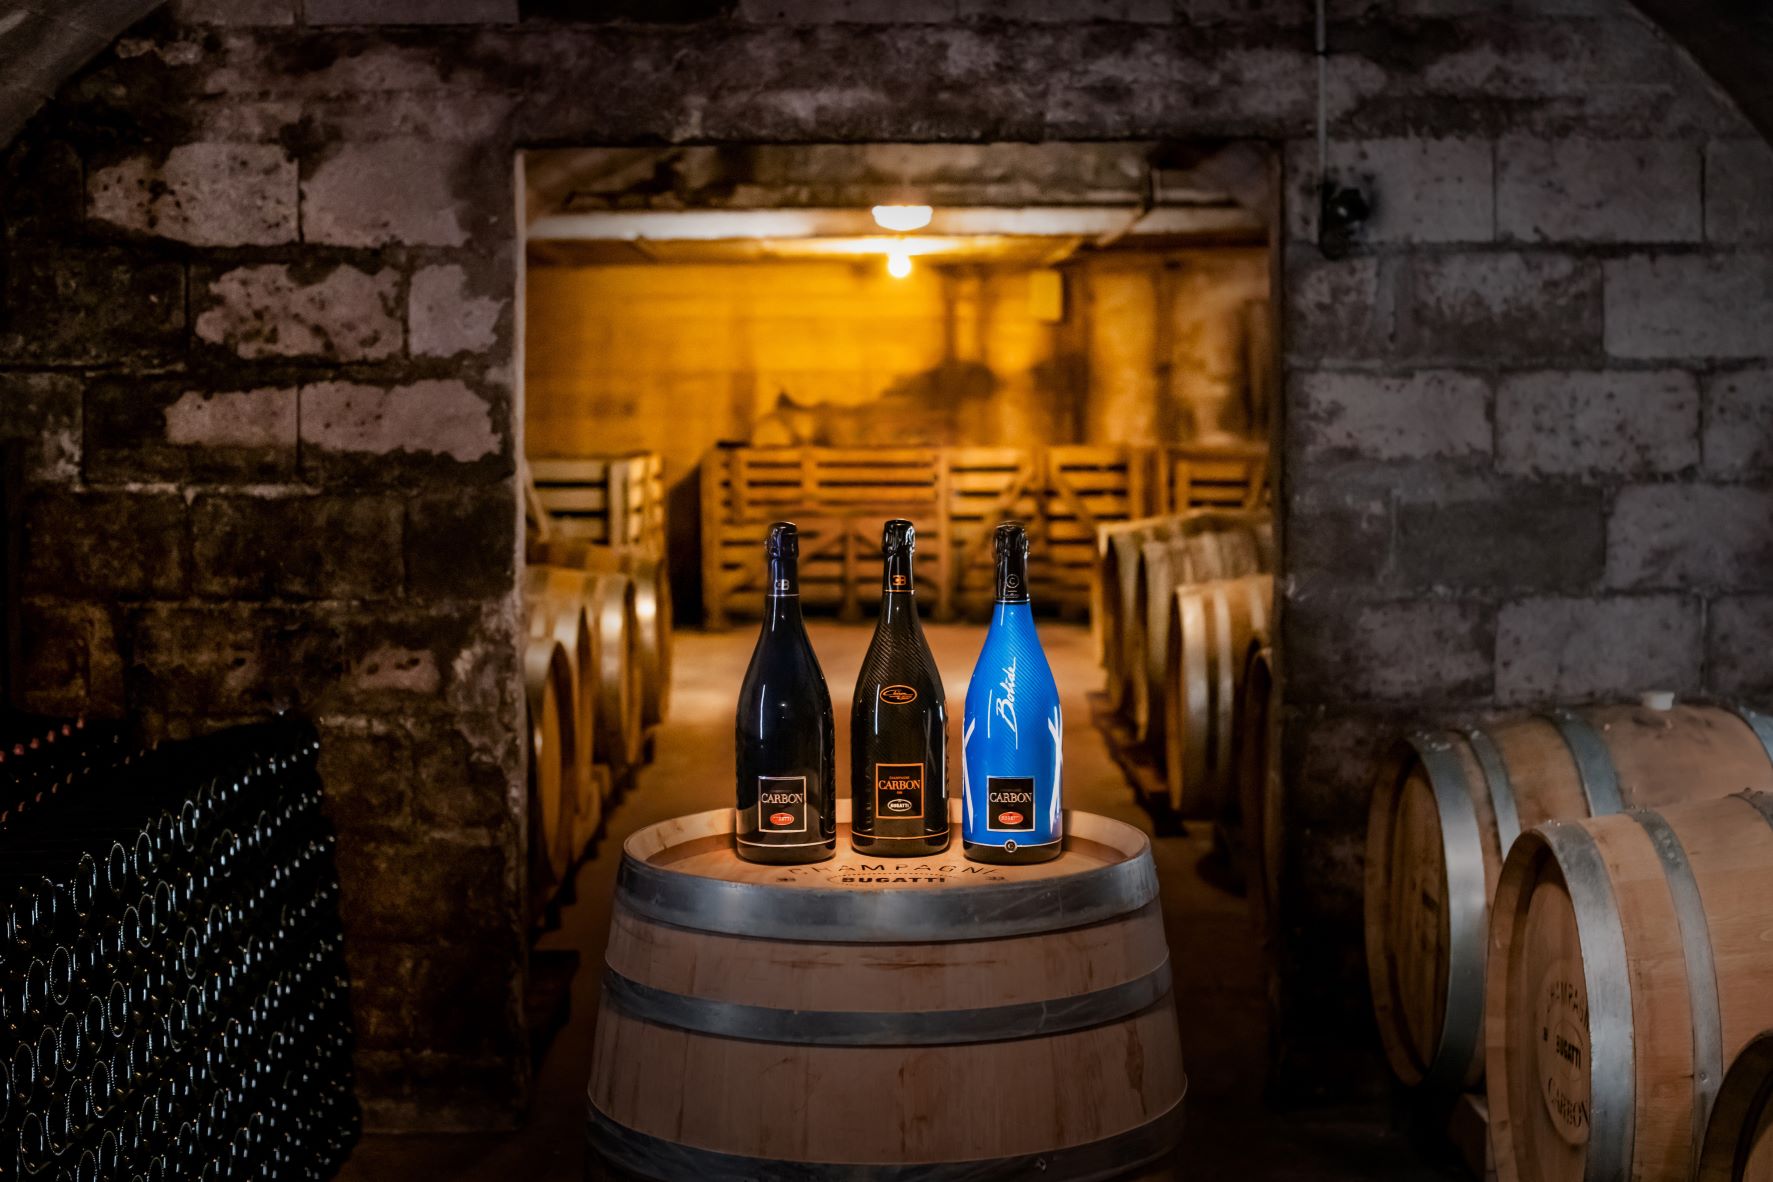 A trio of Bugatti collaborations with Champagne Carbon sitting atop a wine barrel at Champagne Carbon's winery.